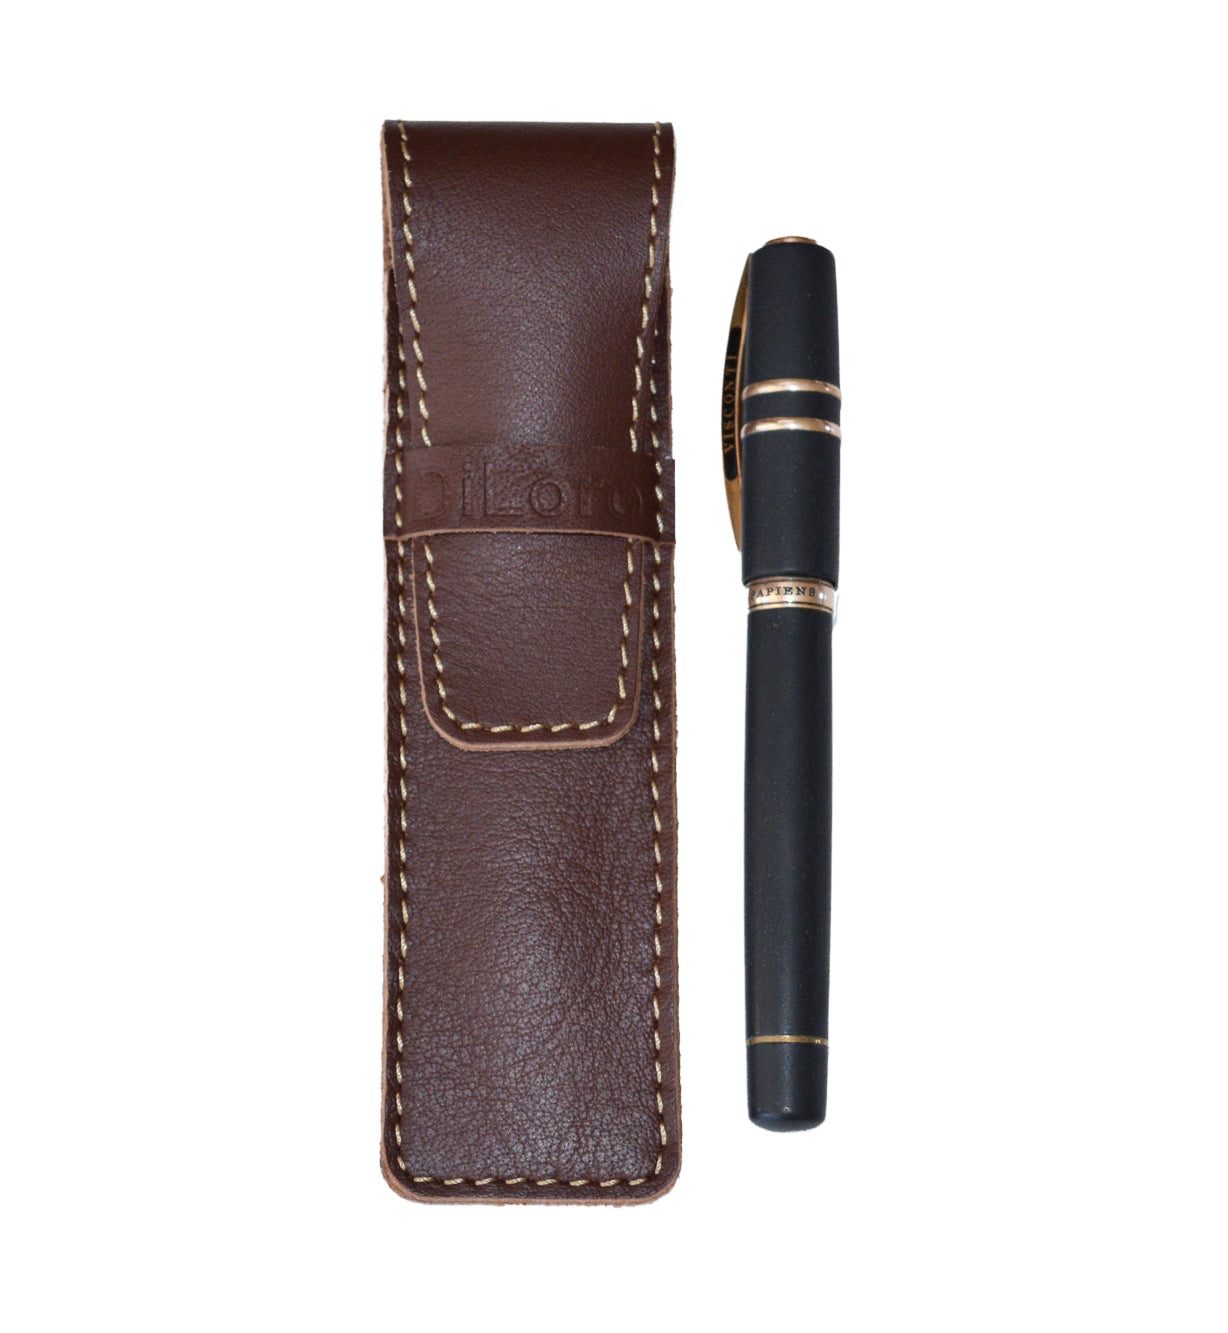 DiLoro Single Leather Pen Holder in Brown Full Grain Leather (pen not included)